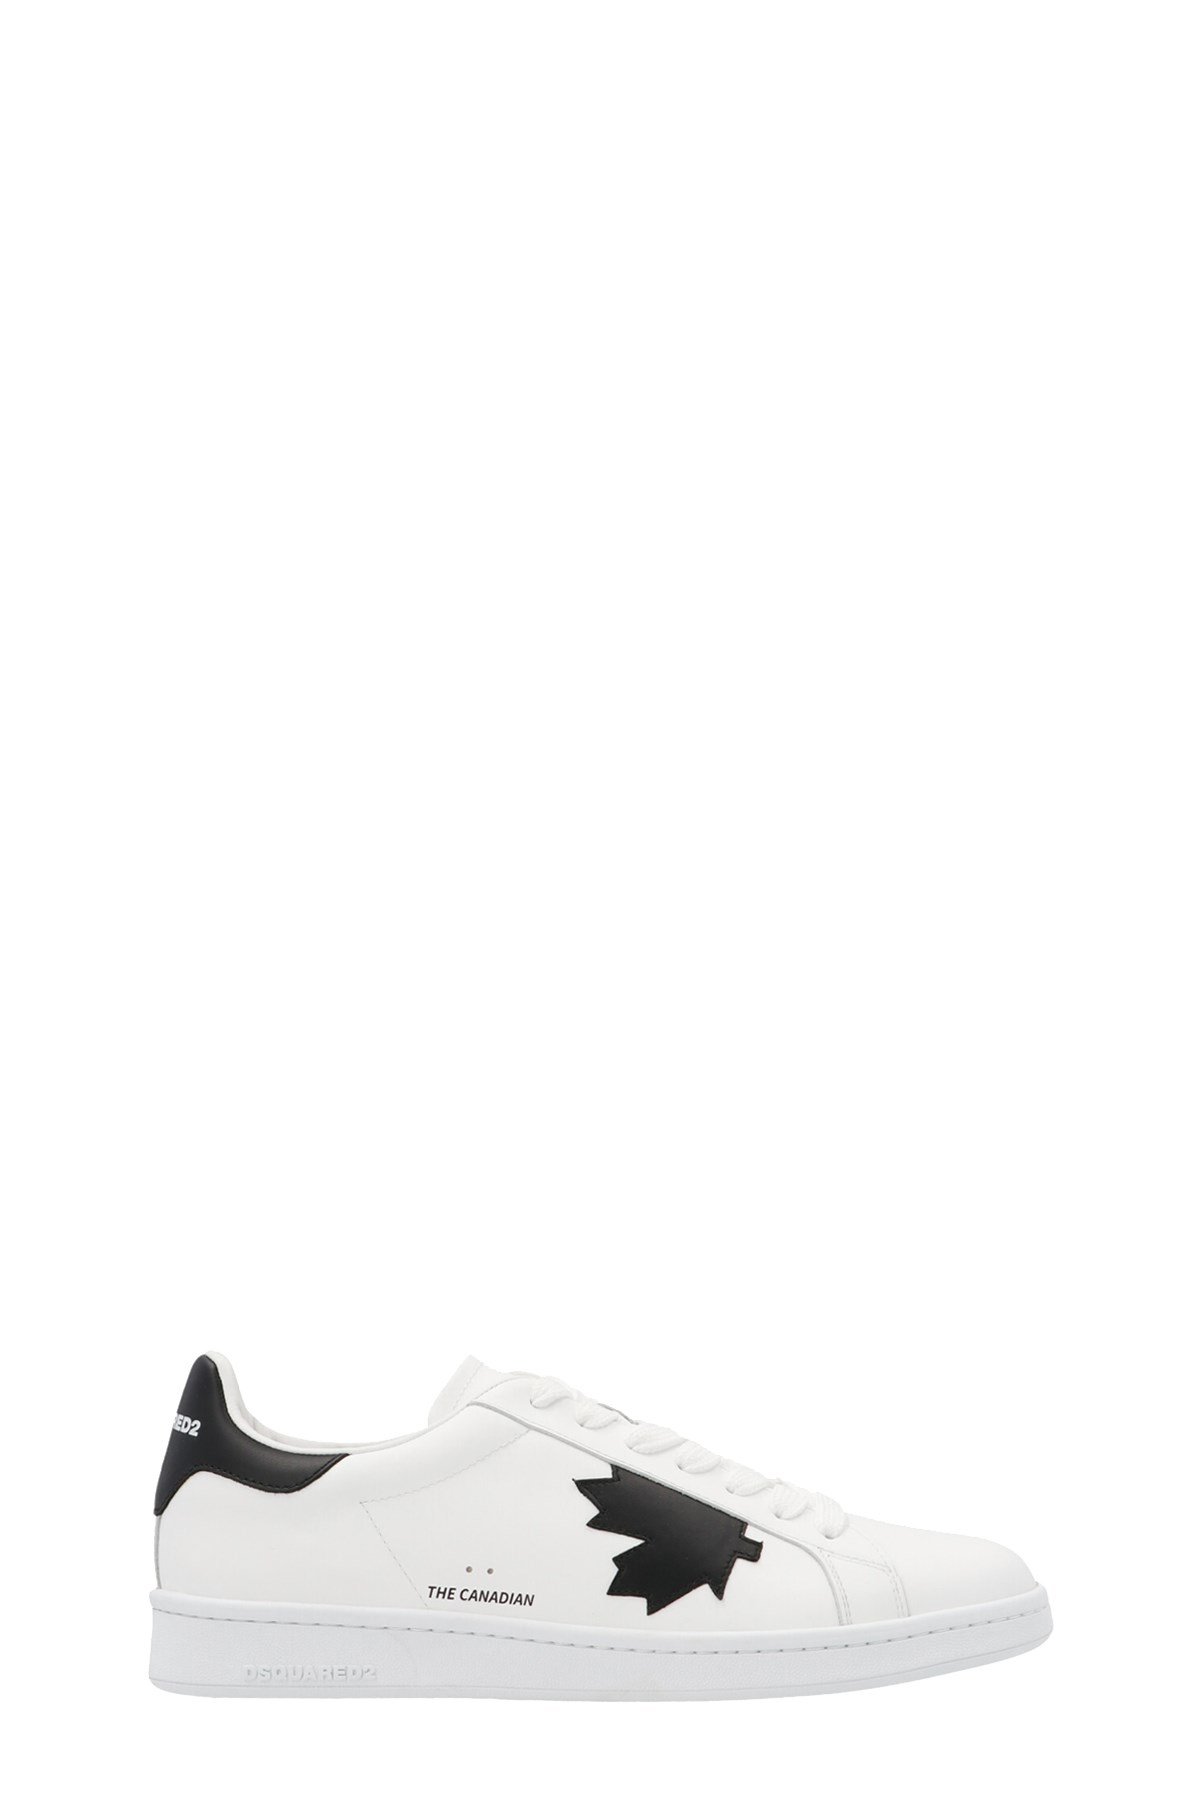 DSQUARED2 Contrast Leaf Sneakers